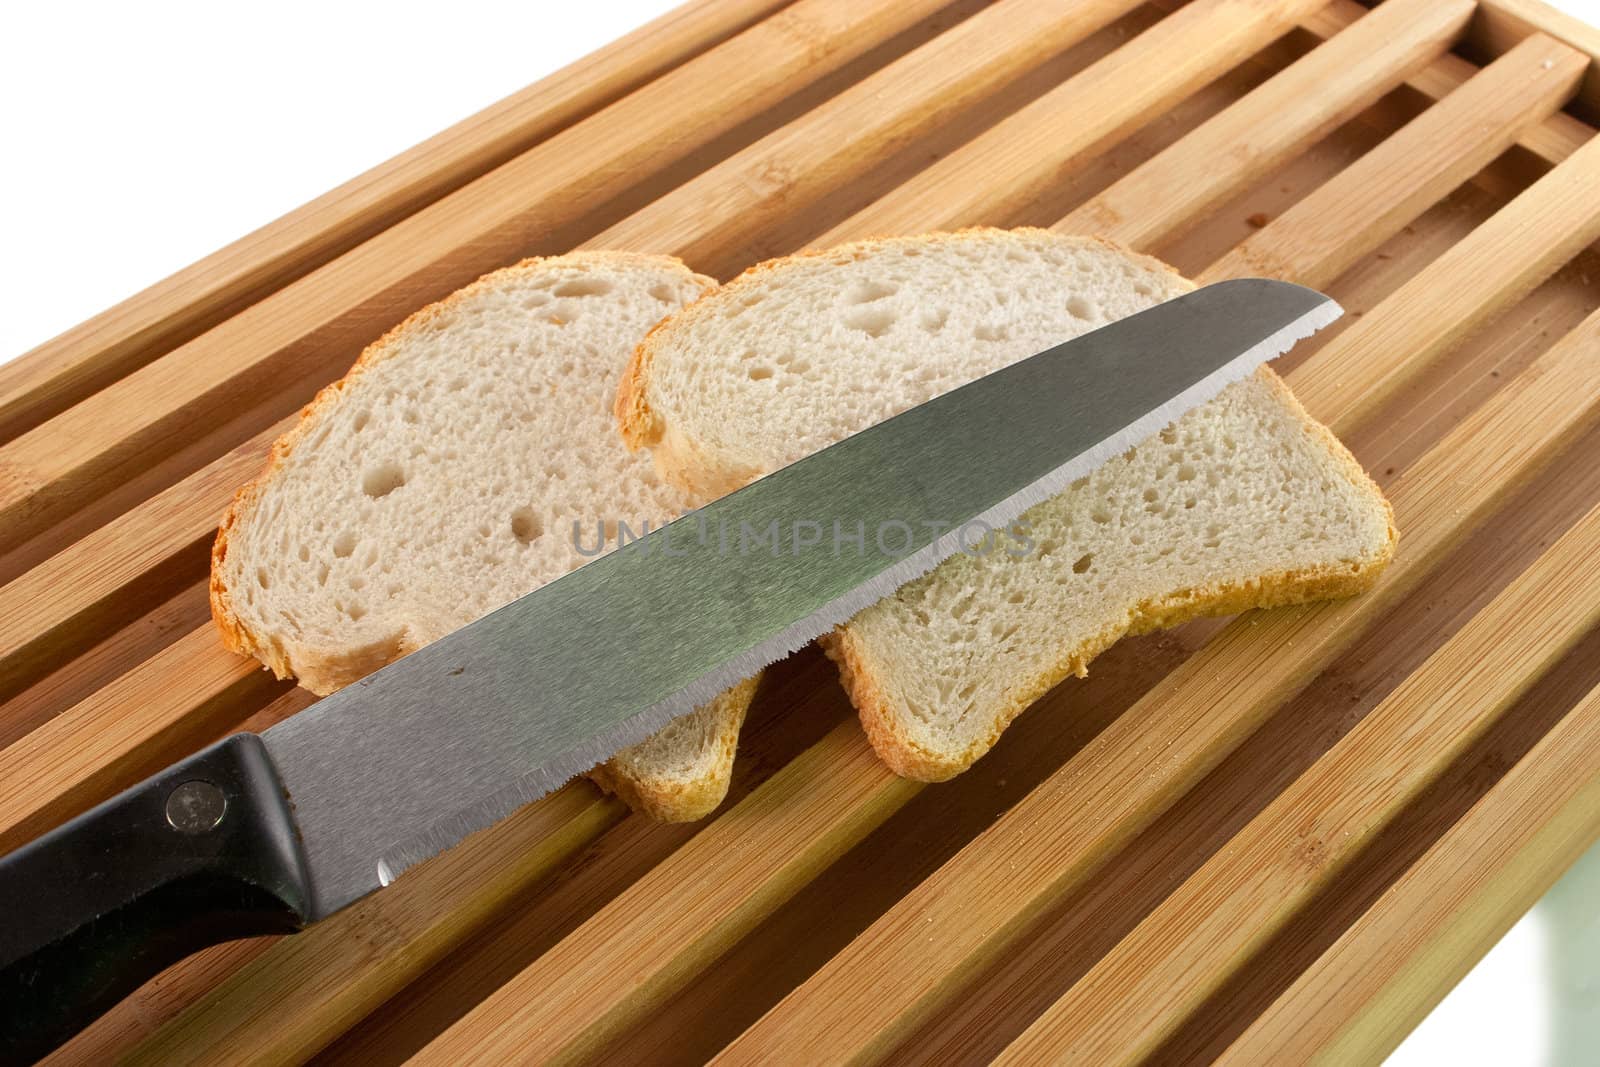 Bread chopping board with knife and slices of white bread